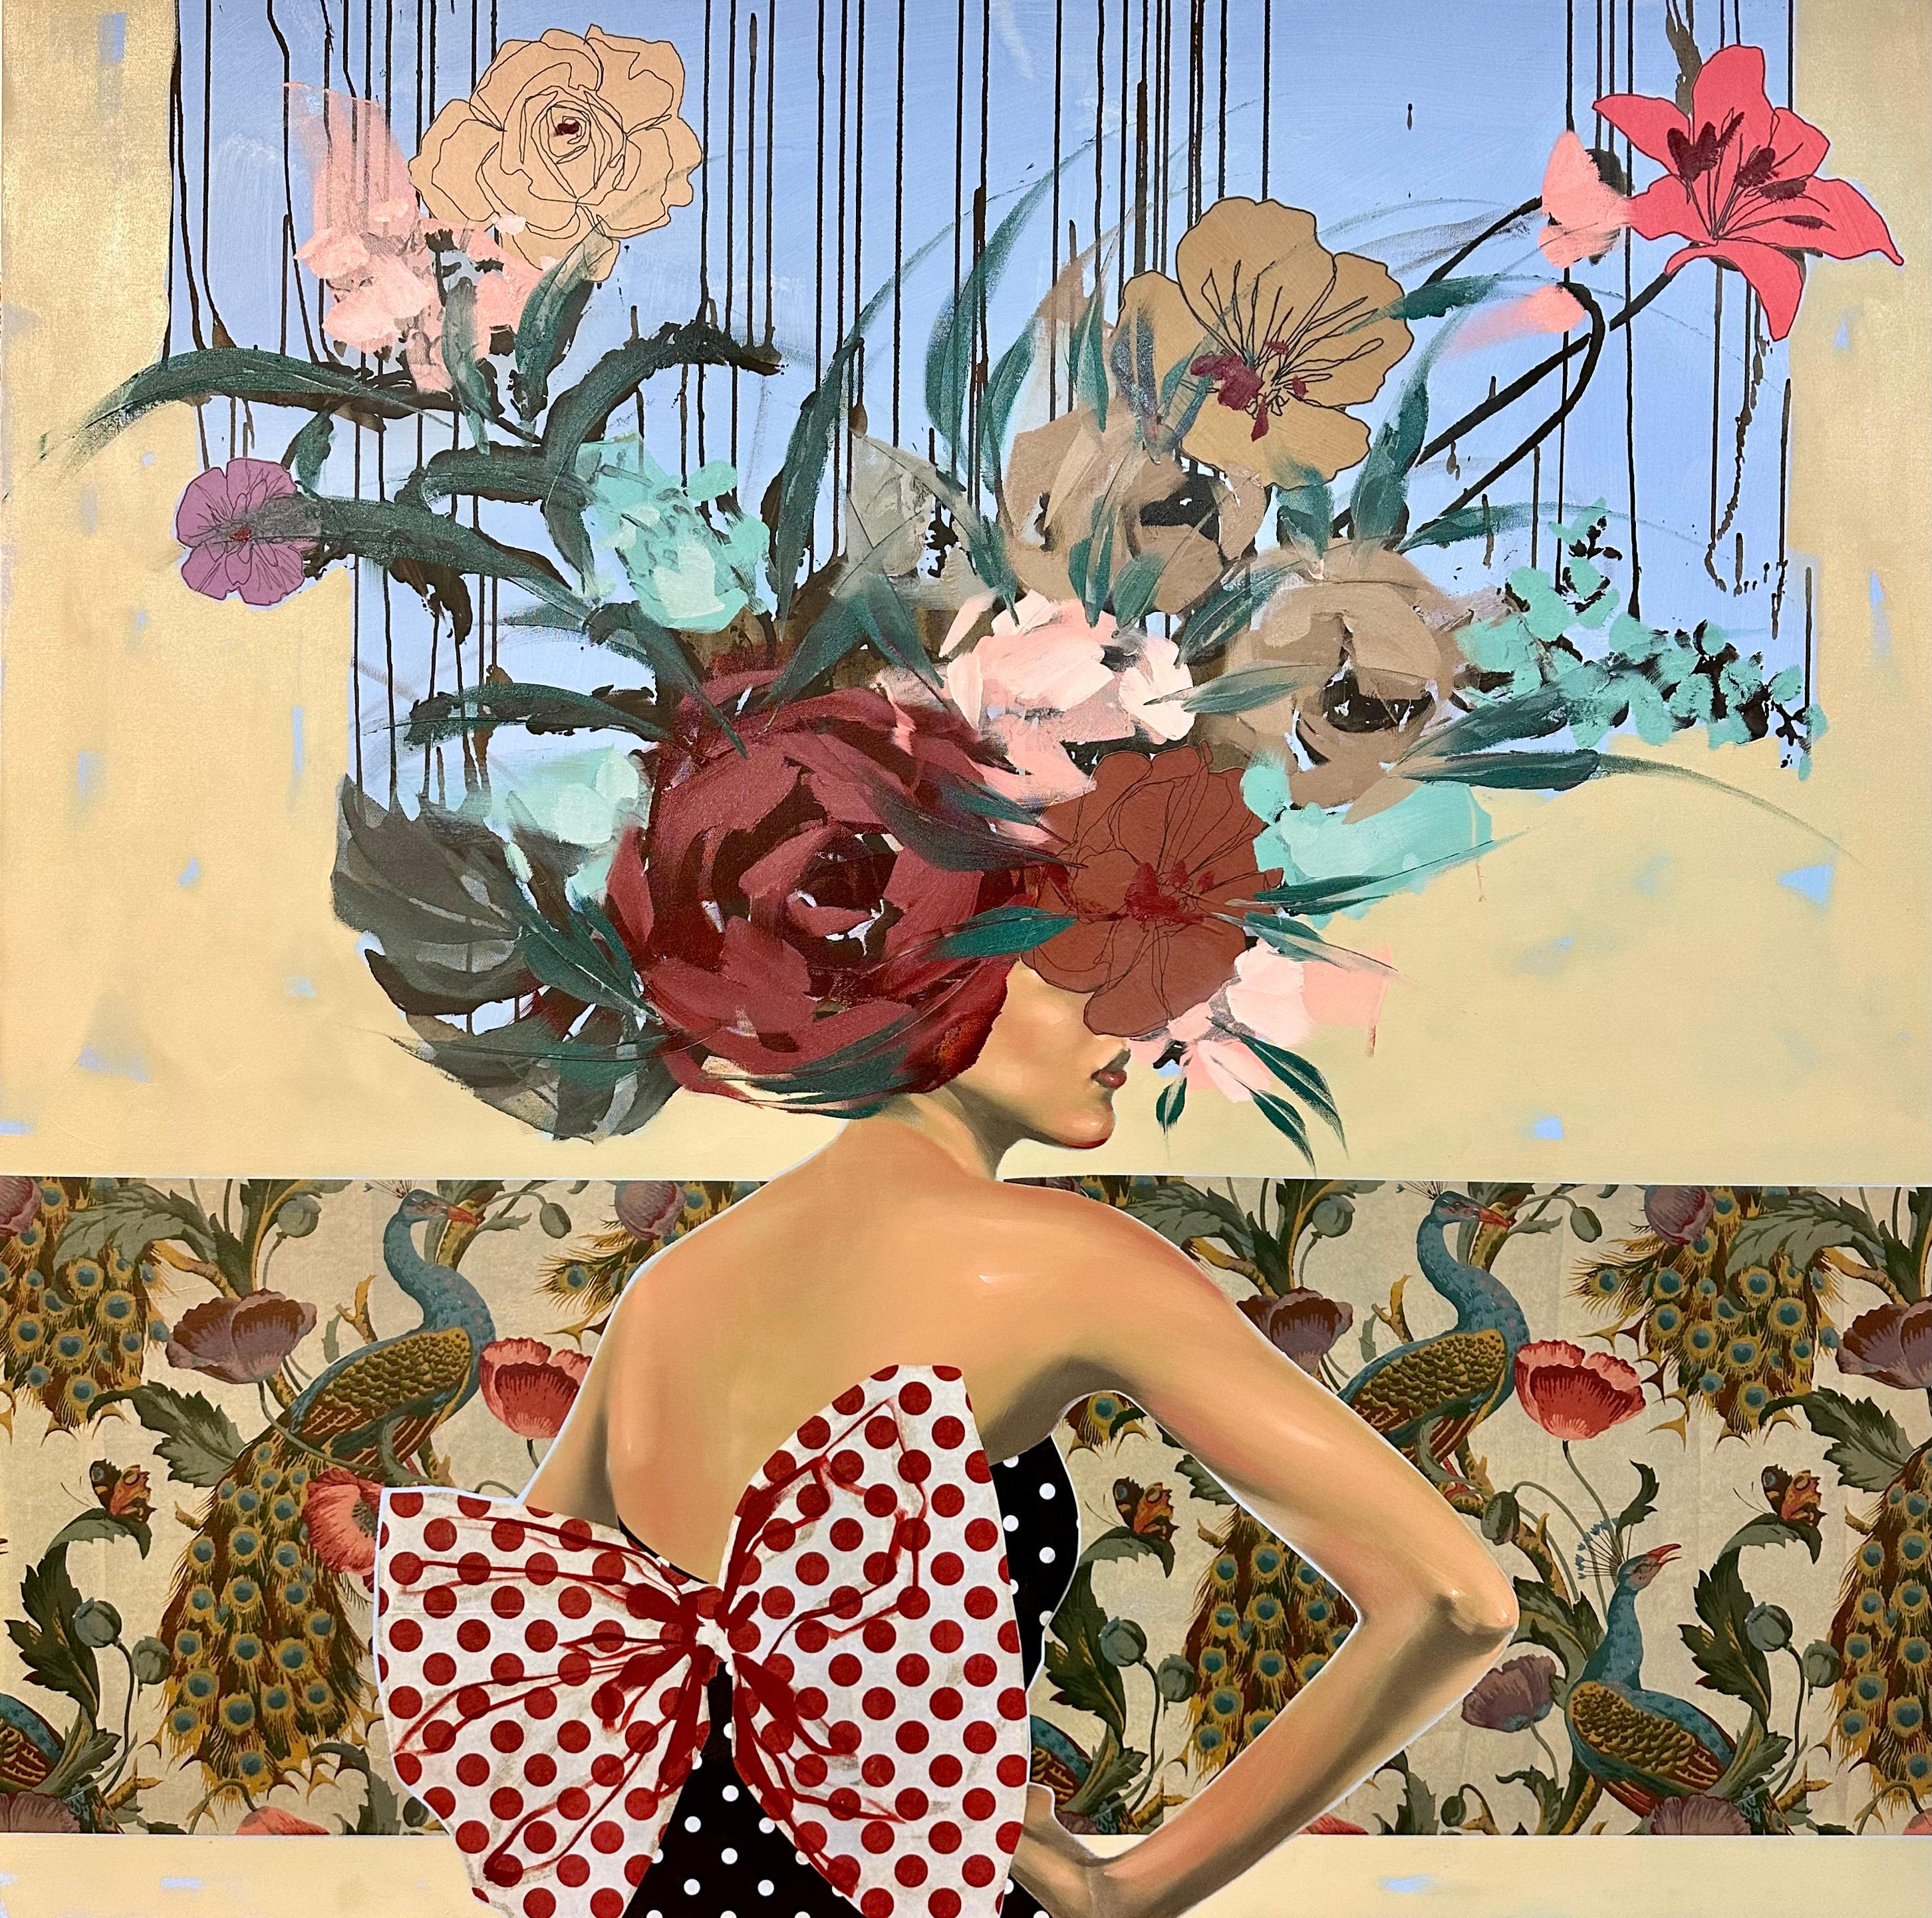 ANNA KINCAIDE
"Make Believe"
Oil & Mixed Media on Canvas
60 x 60 inches

Communicating emotion and narrative with limited assistance from her figure’s facial expressions, Anna Kincaide creates cascades of flowers that cover her subjects to explore